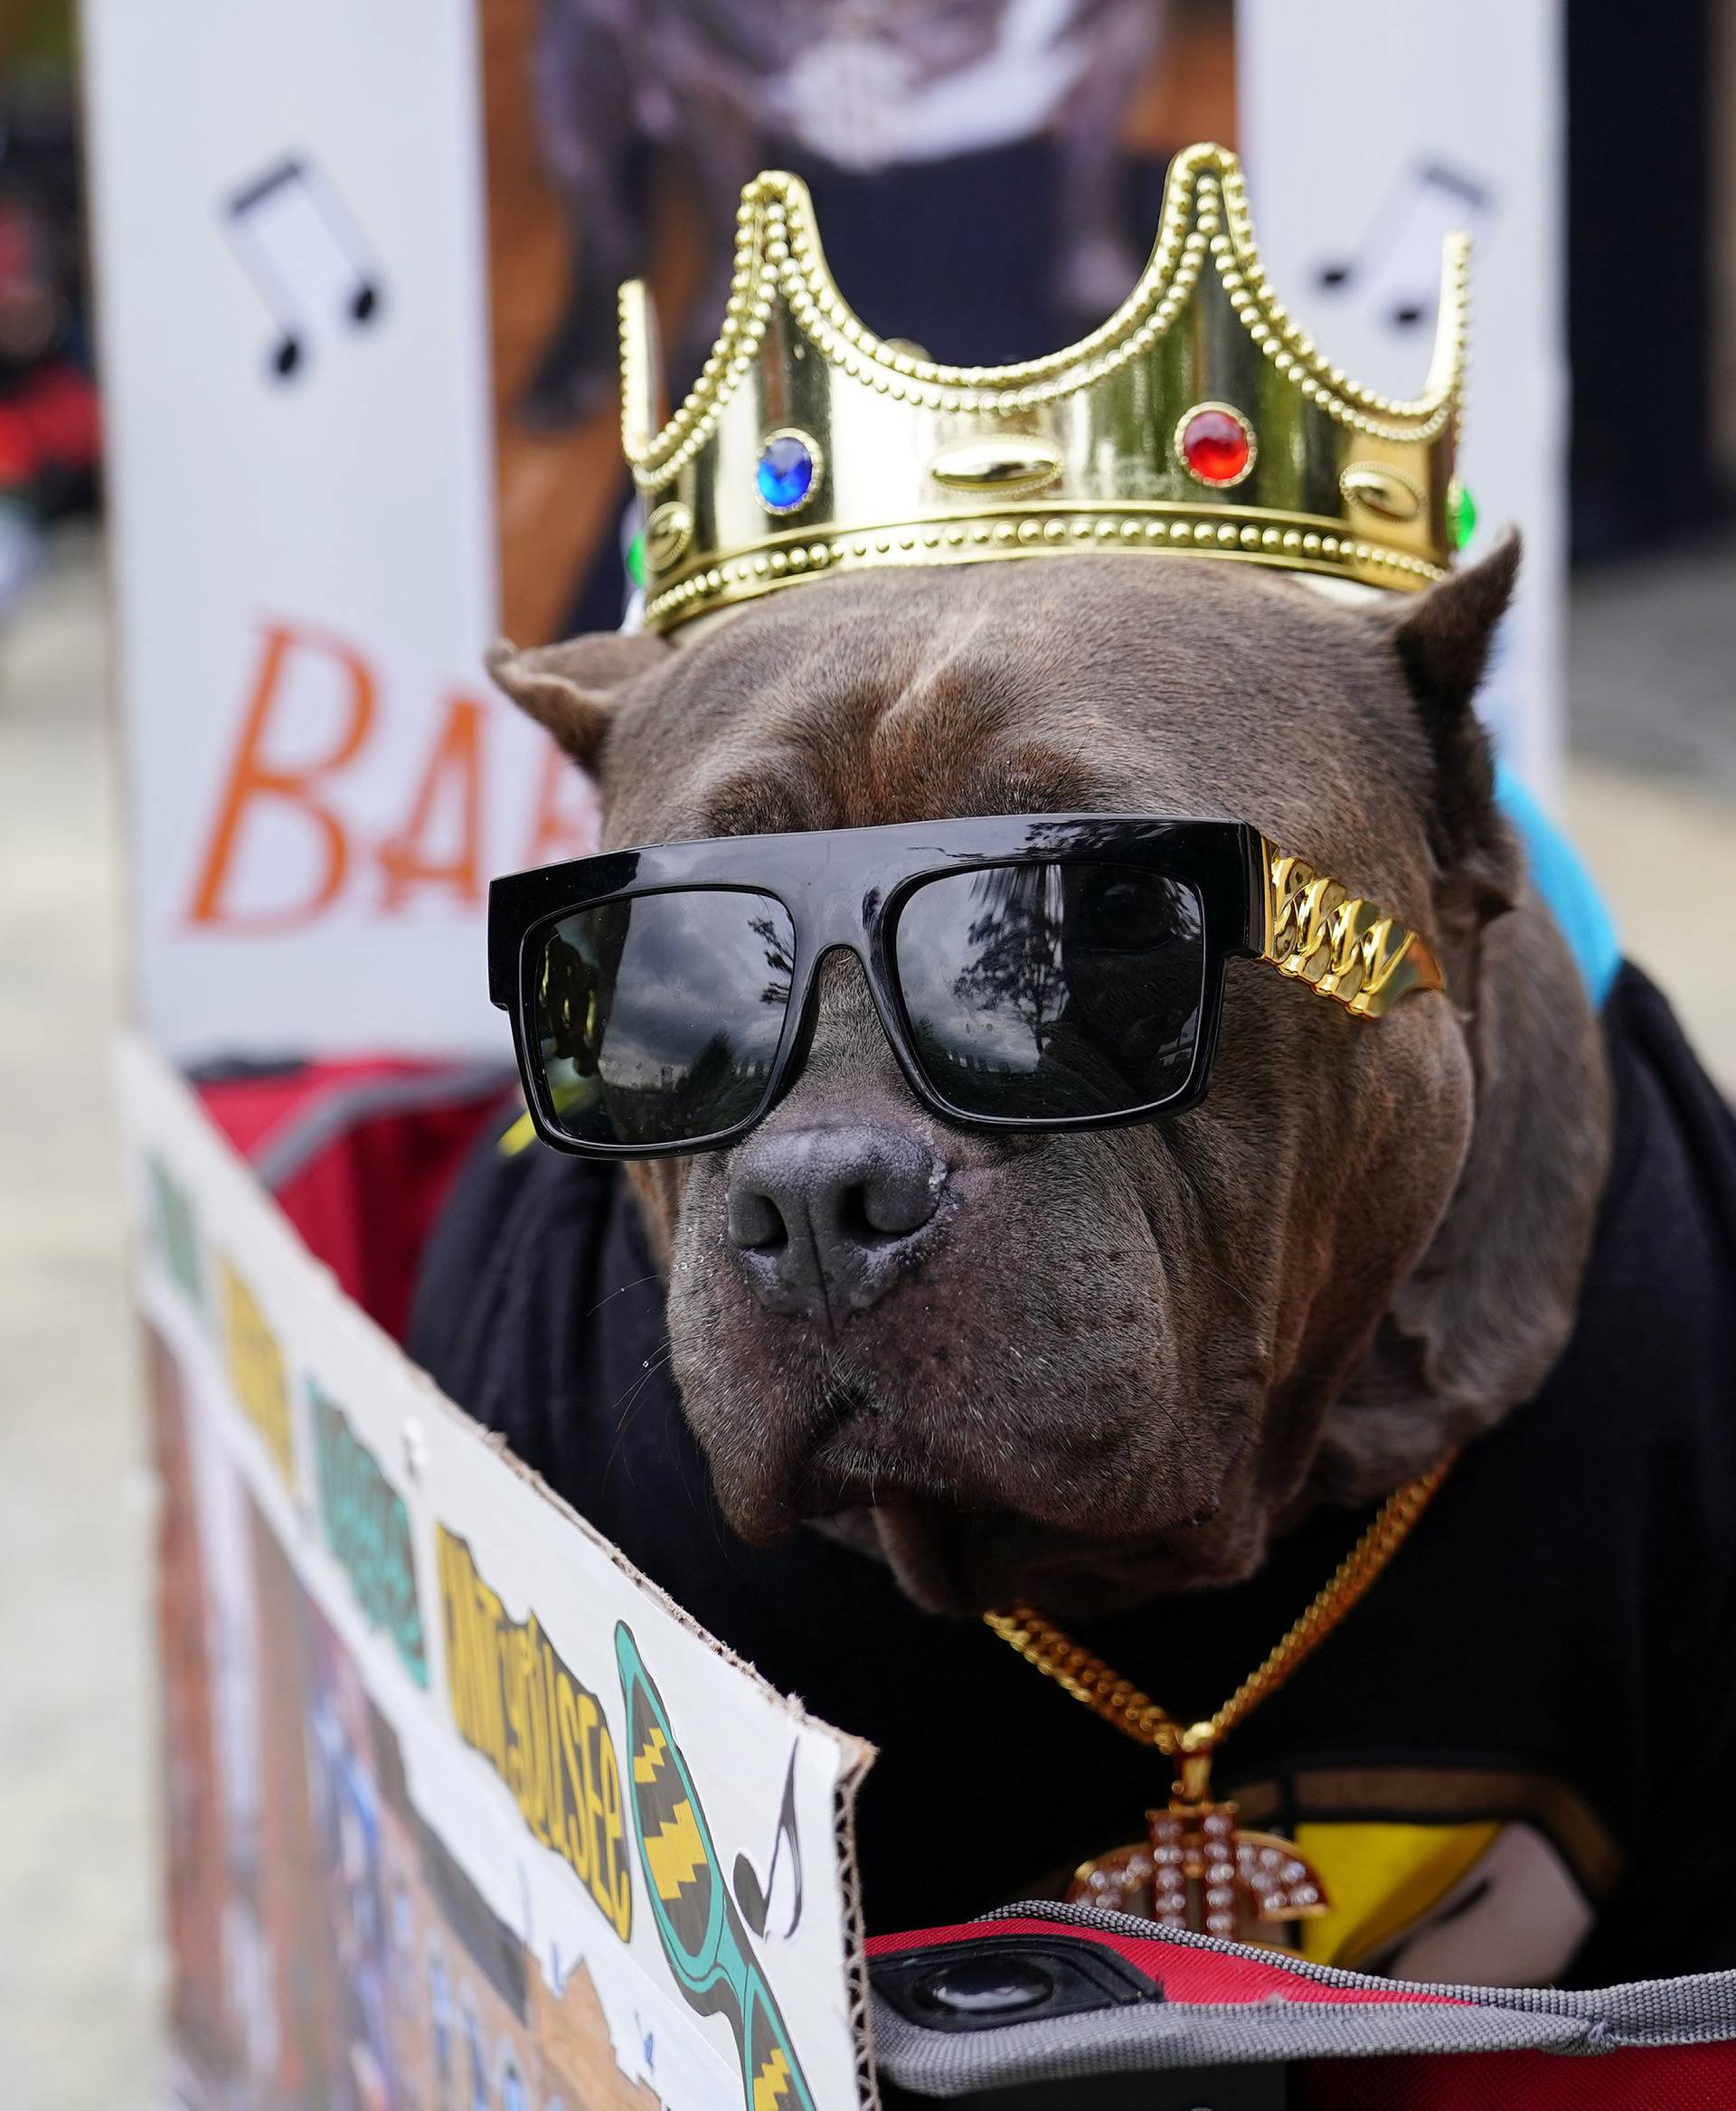 A dog dressed as rapper Biggie Smalls attends the Tompkins Square Park Halloween Dog Parade at East River Park in the Manhattan borough of New York City